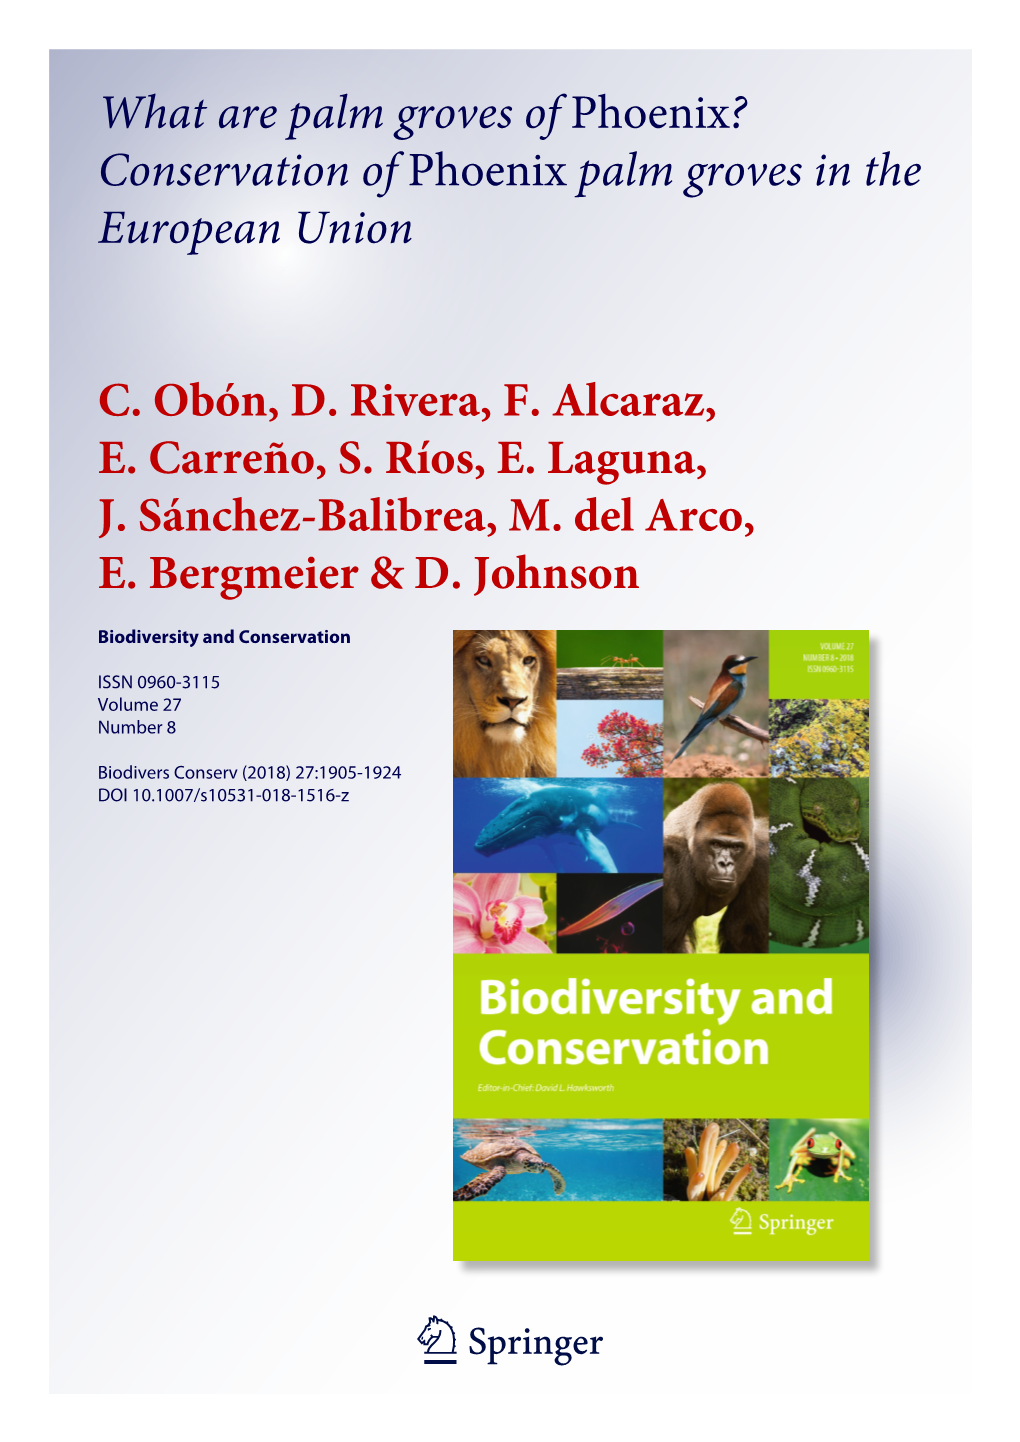 What Are Palm Groves of Phoenix? Conservation of Phoenix Palm Groves in the European Union